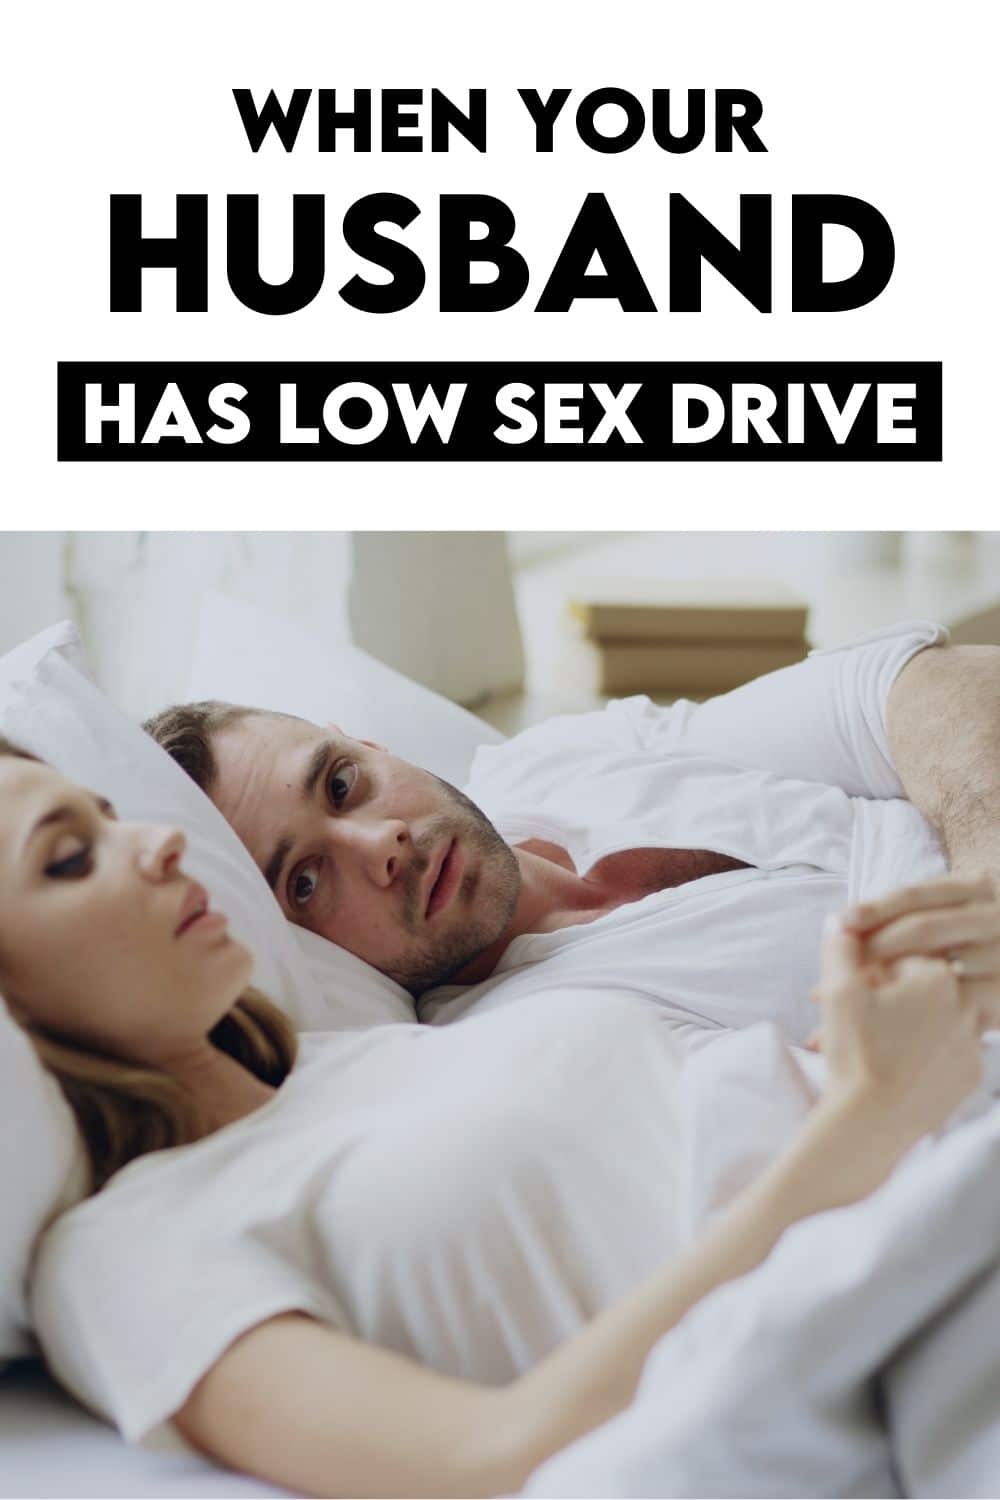 Low Sex Drive in Men When, Why, and How